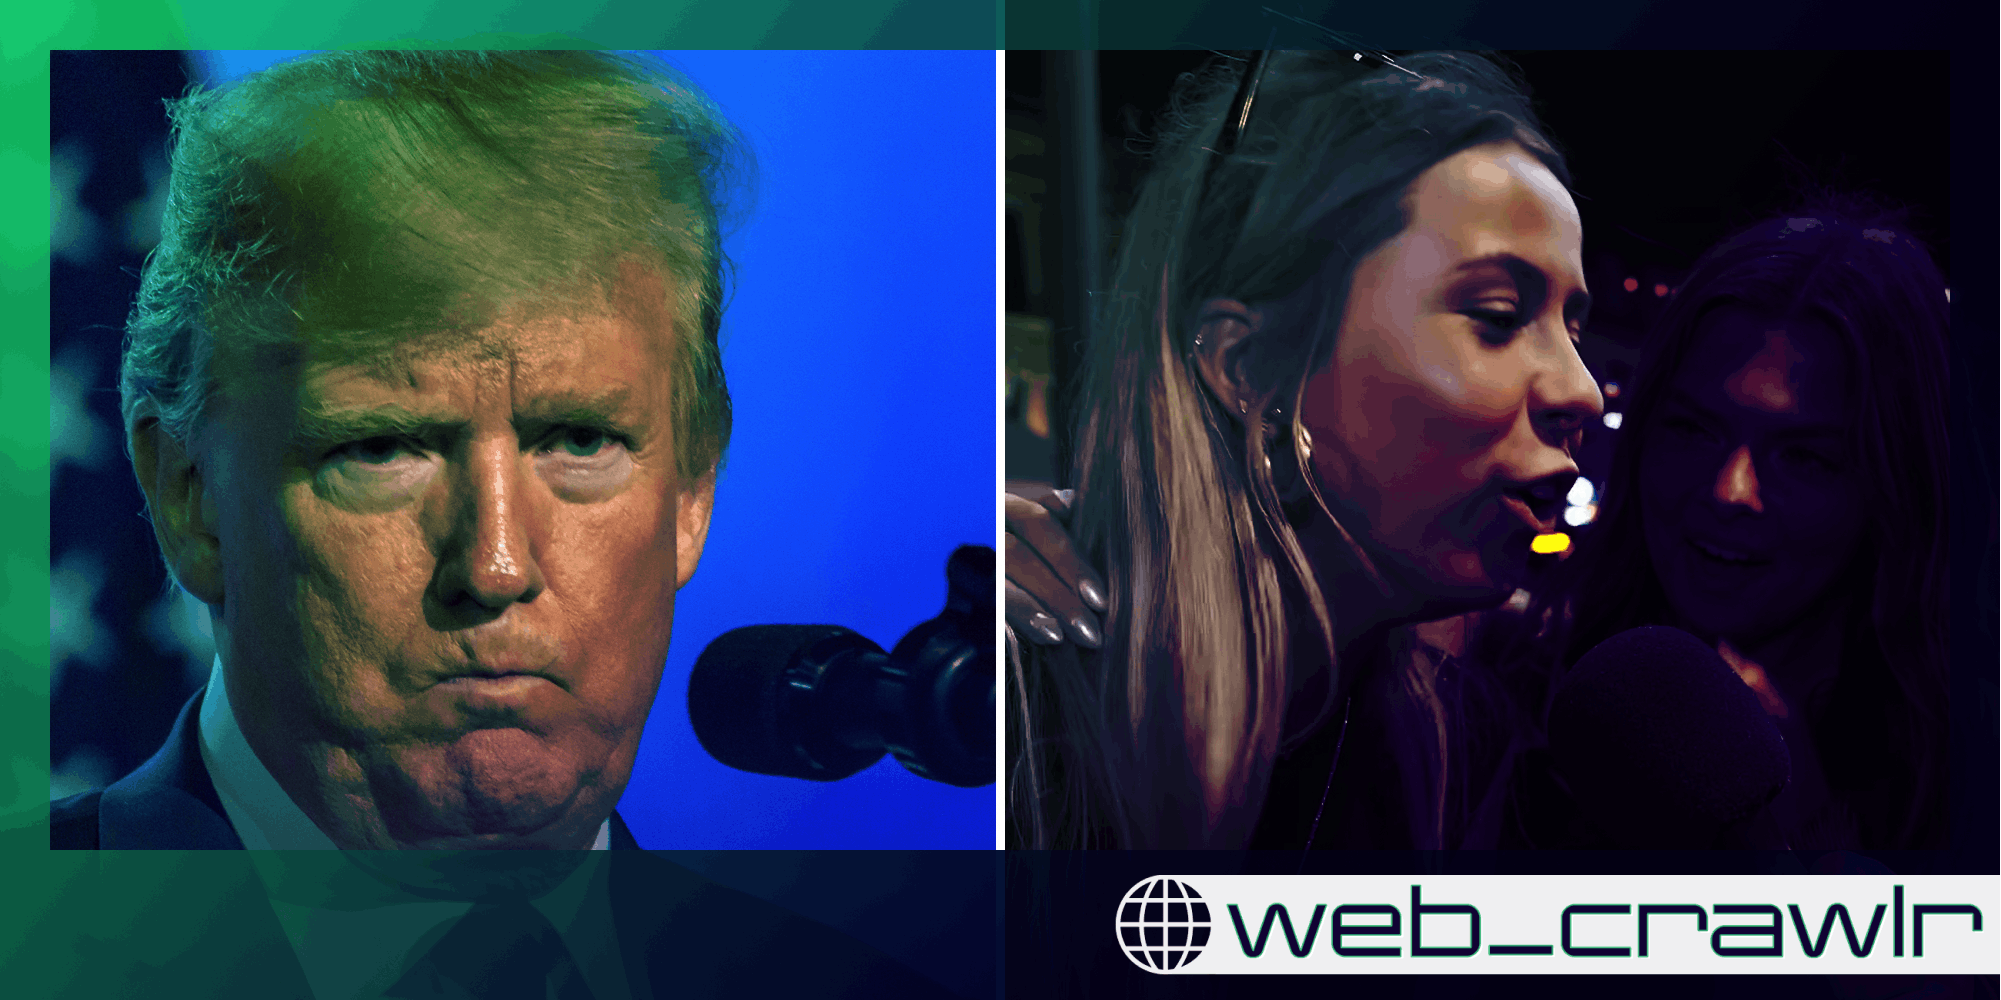 Donald Trump next to the Hawk Tuah girl. The Daily Dot newsletter web_crawlr logo is in the bottom right corner.